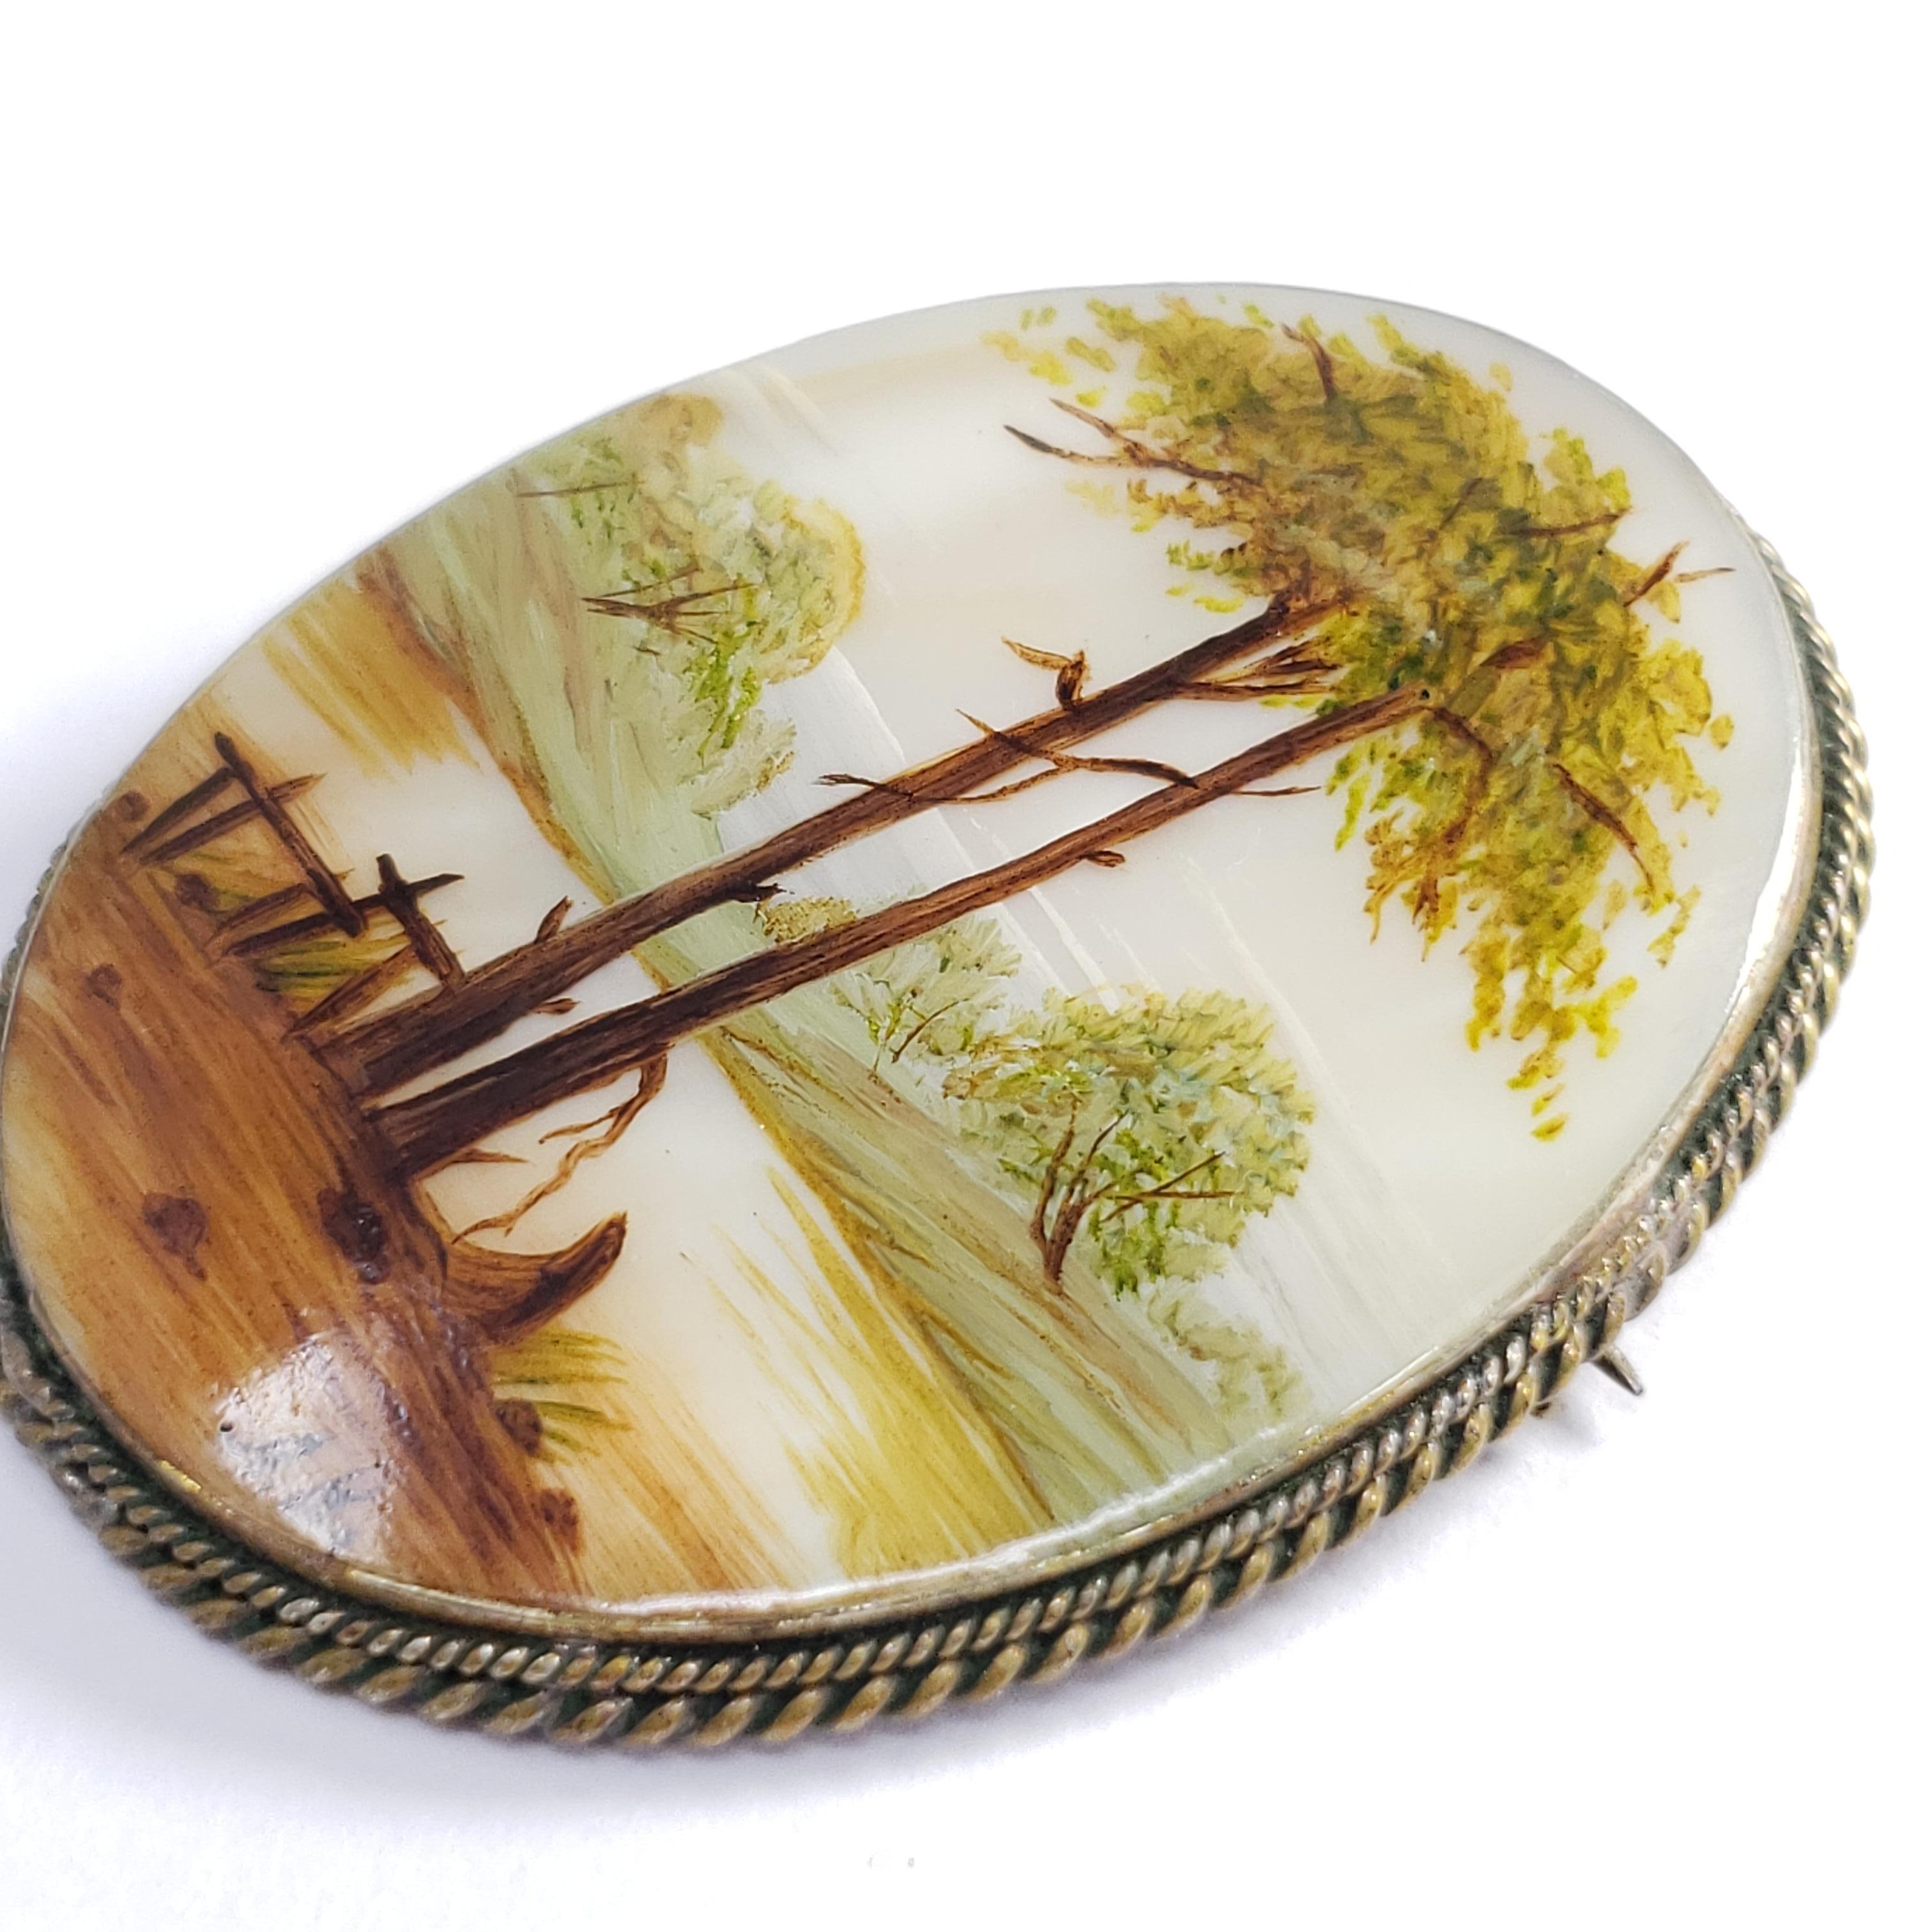 An exquisite Russian Fedoskino brooch set in a beautiful German silver bezel. Features a rustic landscape with two trees in warm earth tones, hand-painted on a mother-of-pearl stone with a layer of lacquer.

Signed by artist - L.B. (Л. Во)

Circa